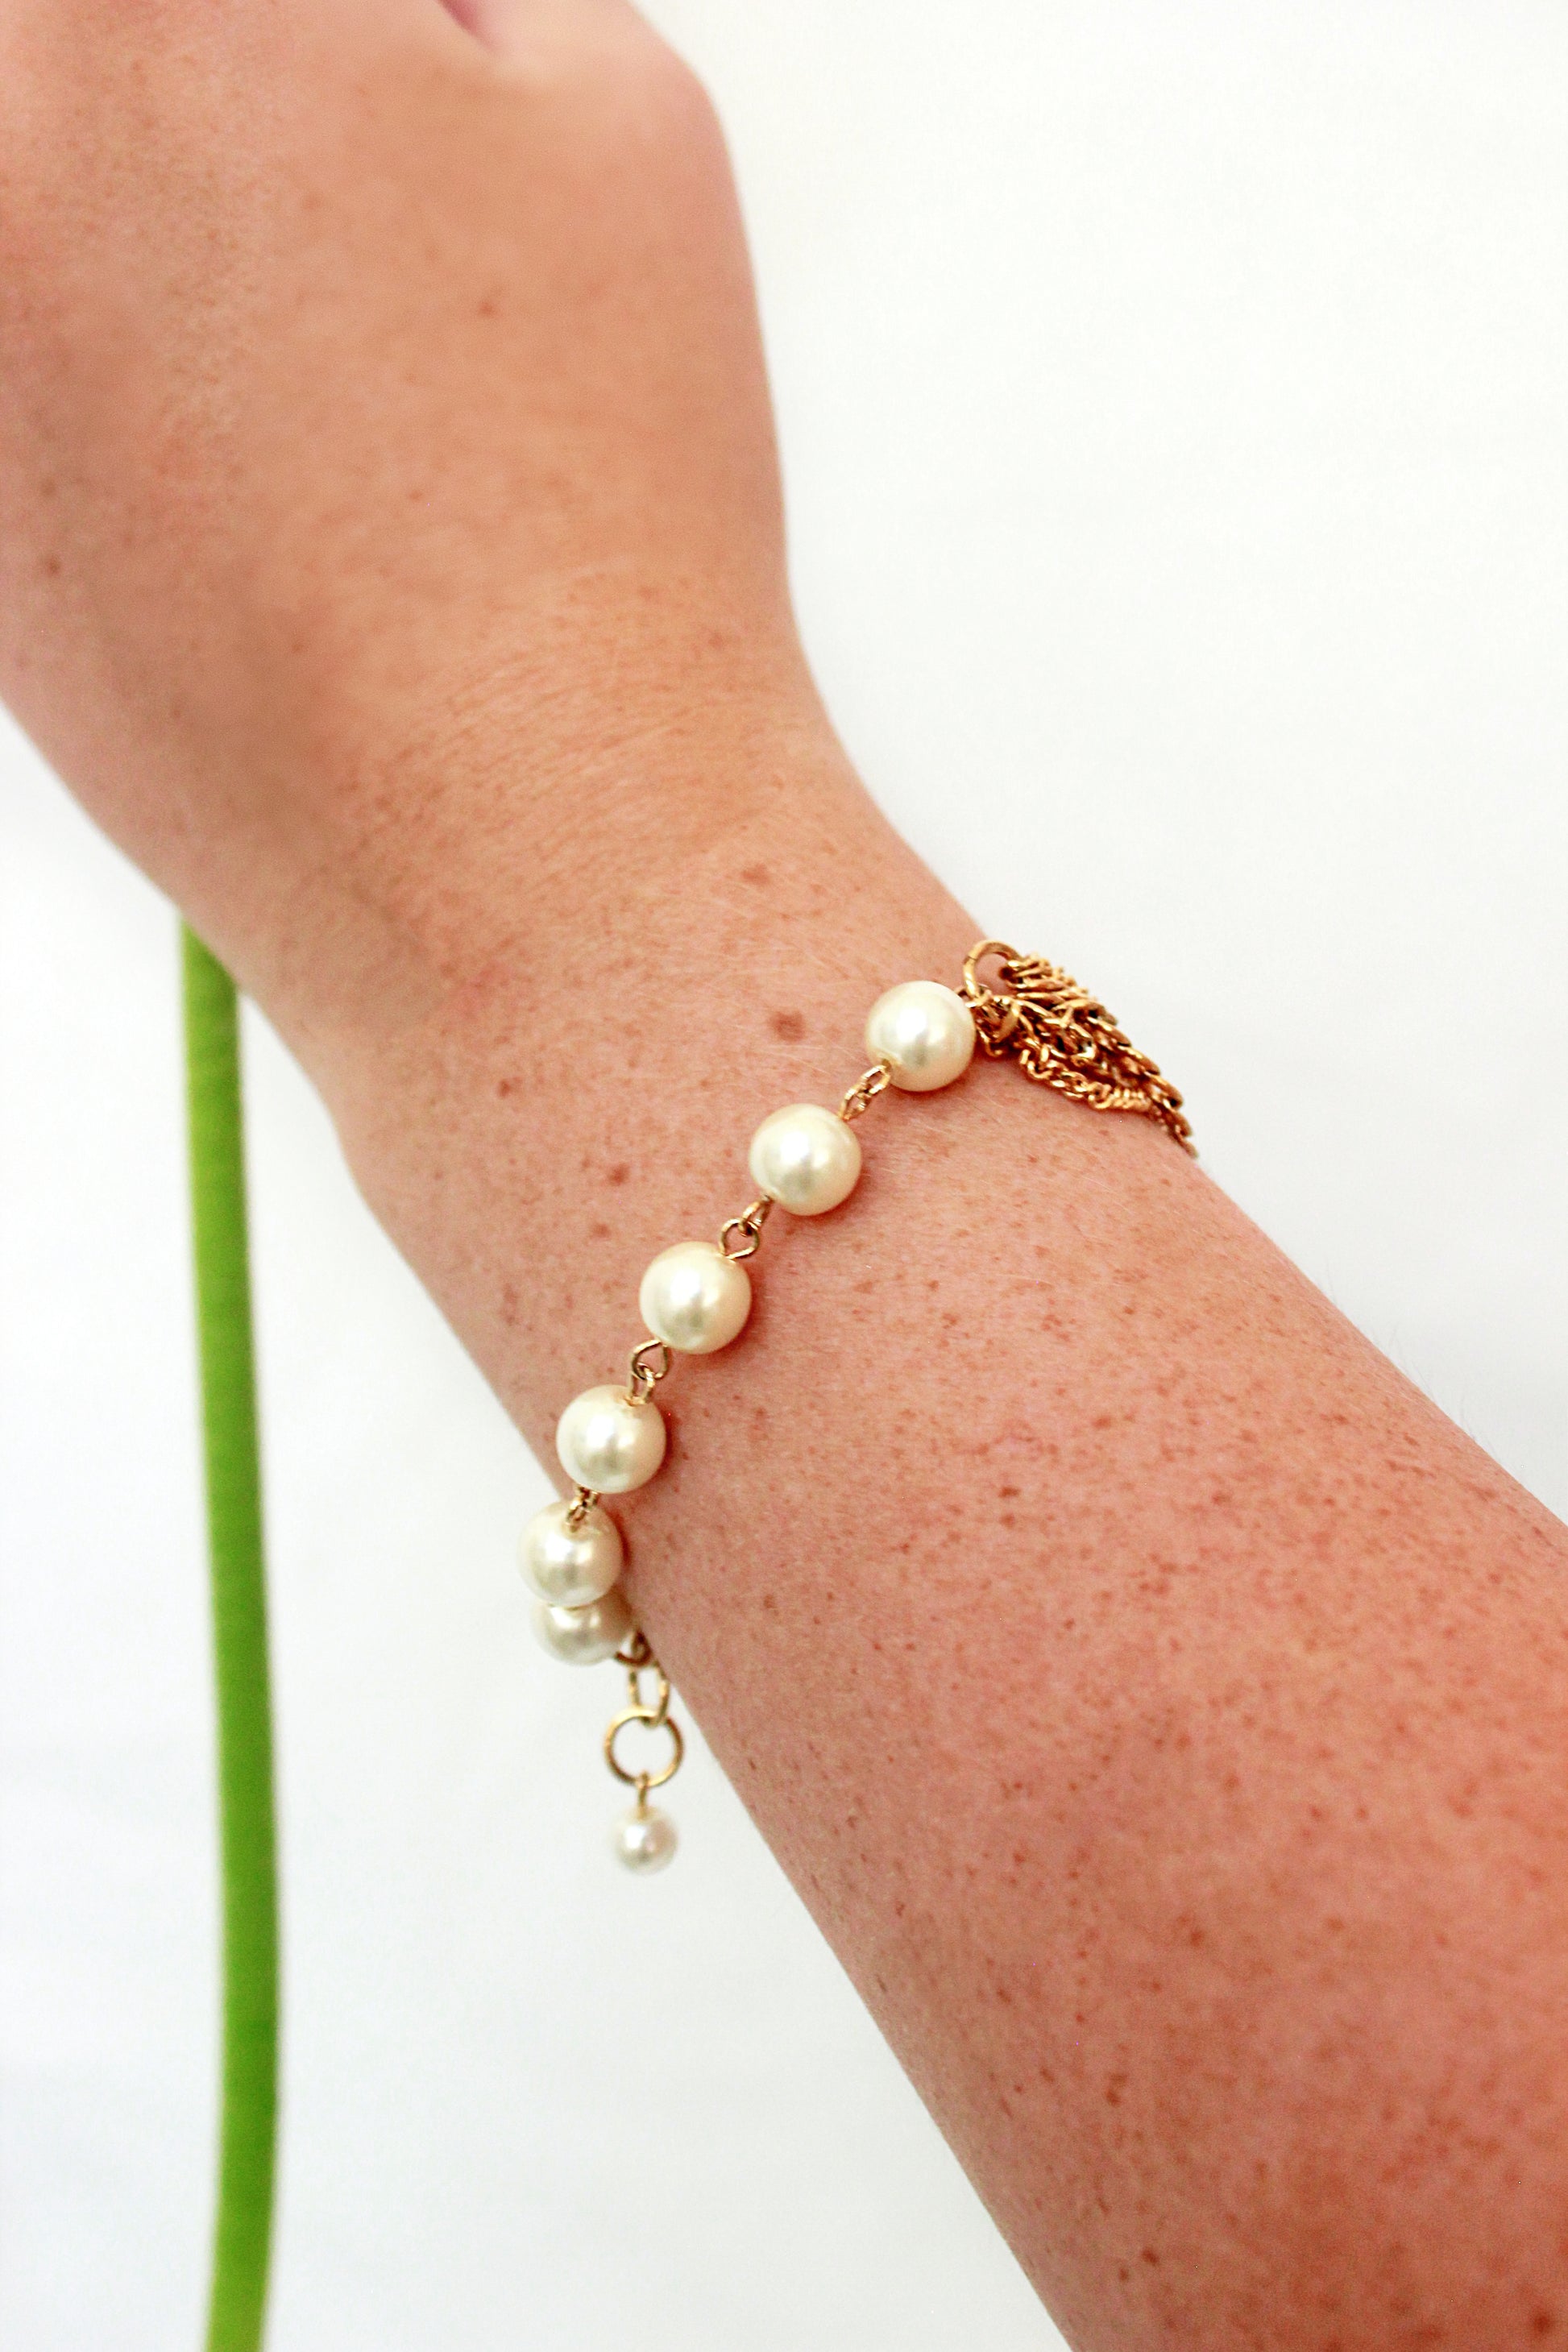 Gold Bracelet Pearl Bead Bracelet Gold Chain Charm Bracelet Pearl Dainty Layering Bracelet Bridesmaid Gift Boho Wedding Jewelry Simple, KAI bracelet for Her, for Bride, for Bridesmaid Gift , for Mother of the Bride, for Wedding Guest or Special Occasion by Camilla Christine Bridal Jewelry and Wedding Accessories. Bridal Style Inspiration Trends for Bride, Wedding Ideas